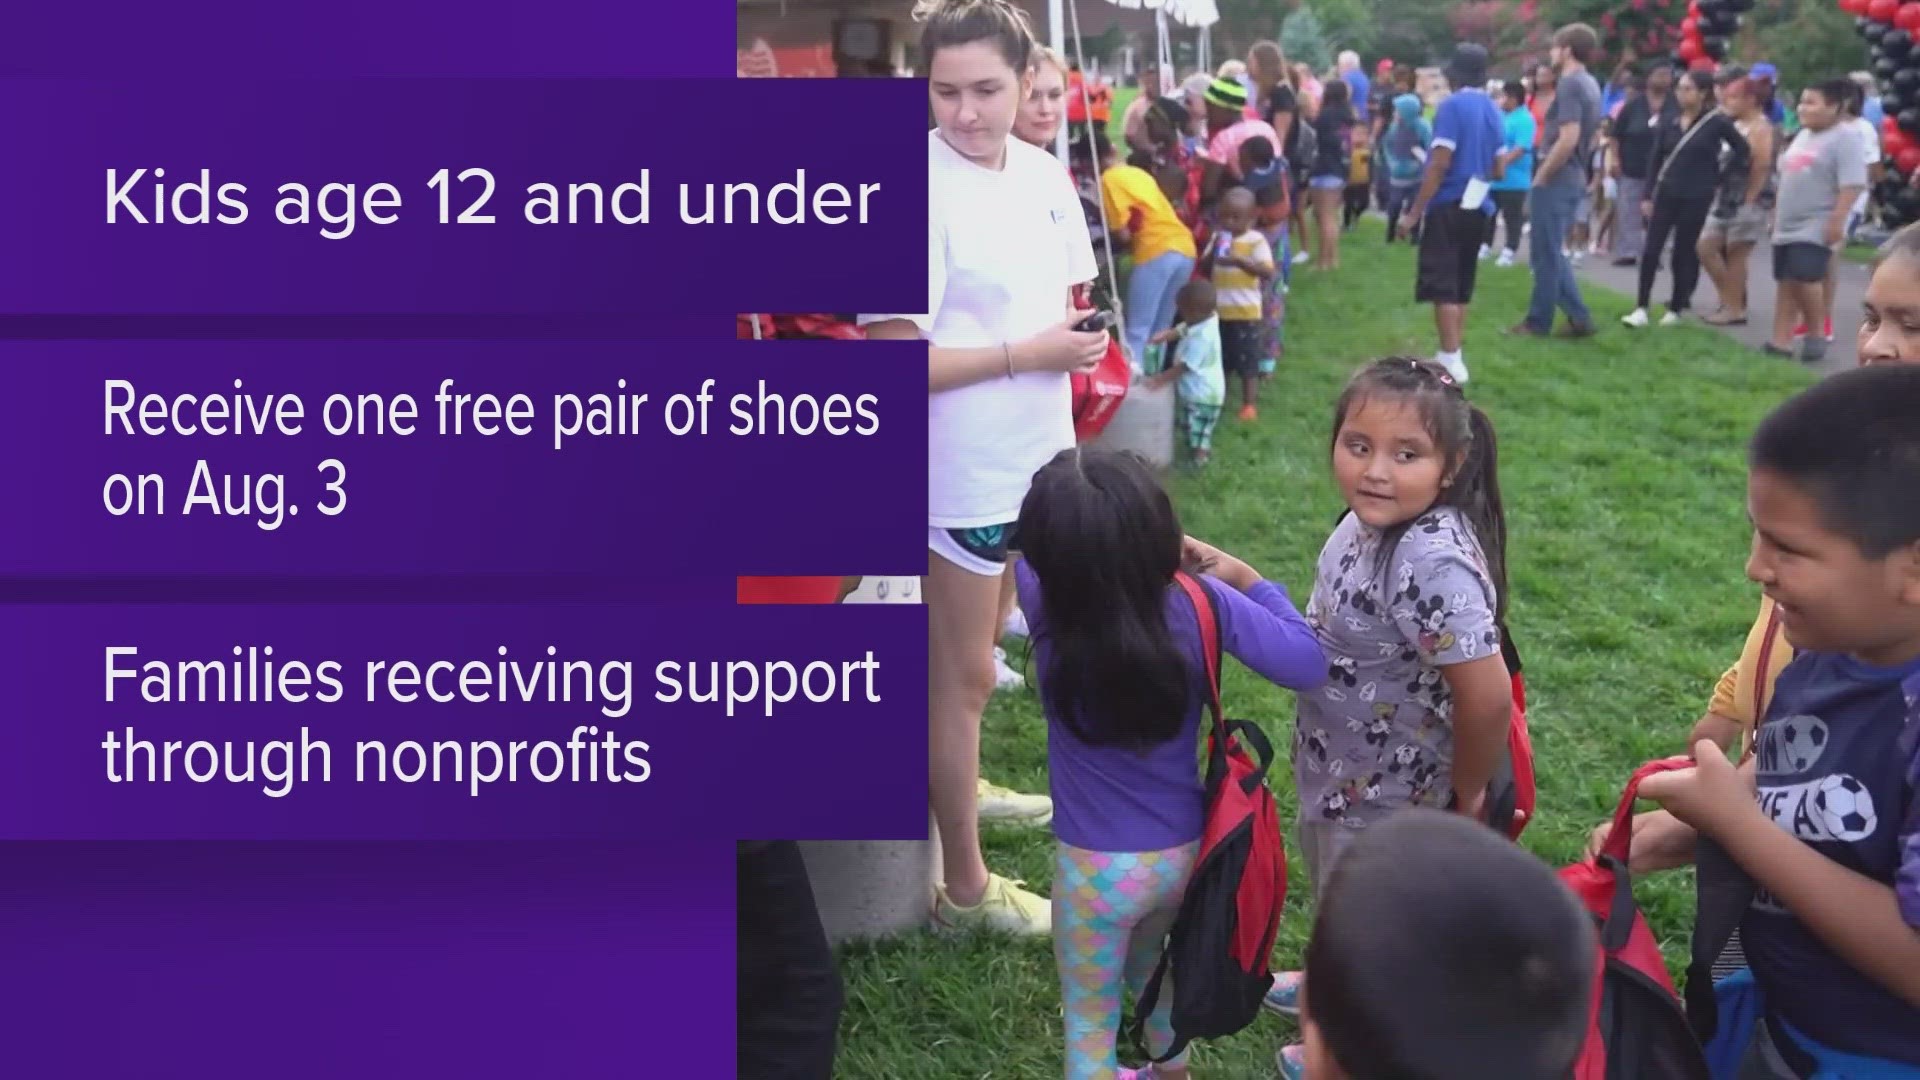 Kids 12 and under can receive a free pair of shoes at the event on Aug. 3. Families receiving support through local nonprofits can register their children.